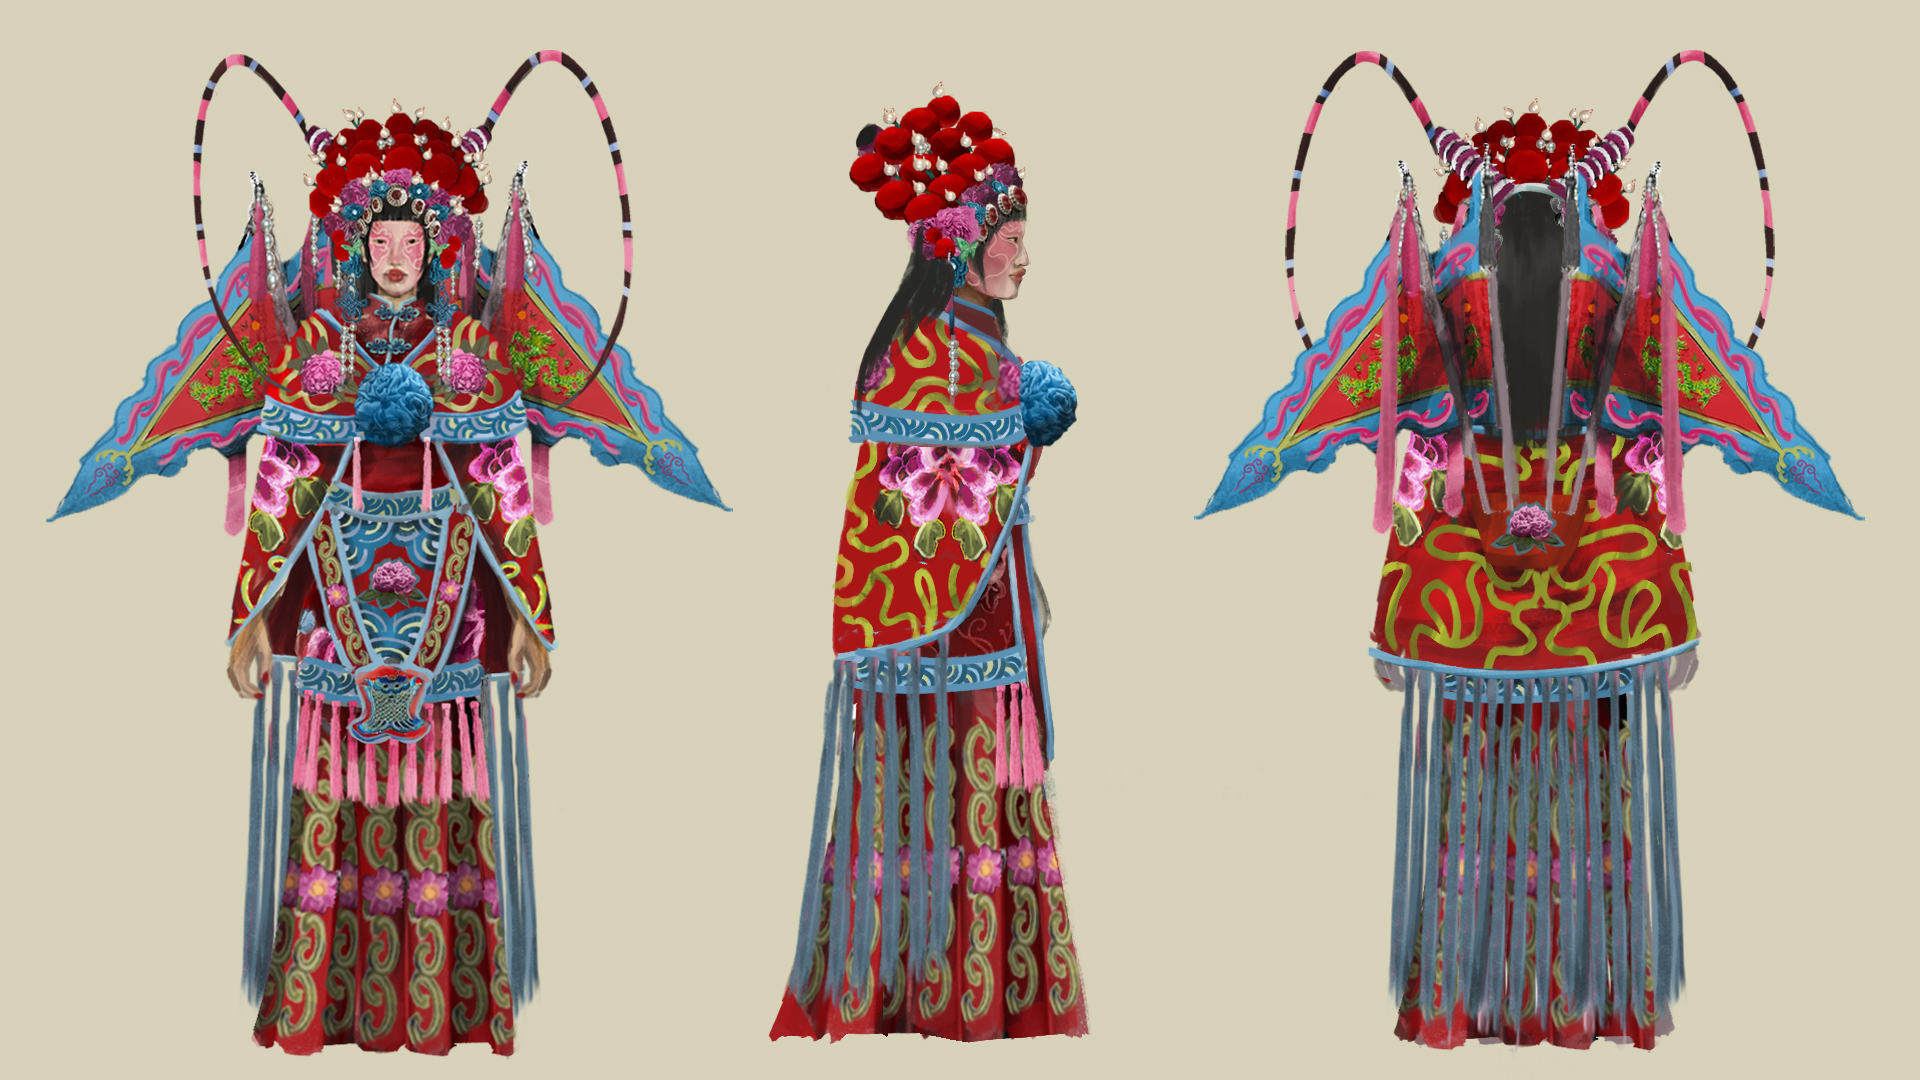 Digital illustration showing three different angles of a young Chinese woman wearing an intricate costume with peony motifs and ripples